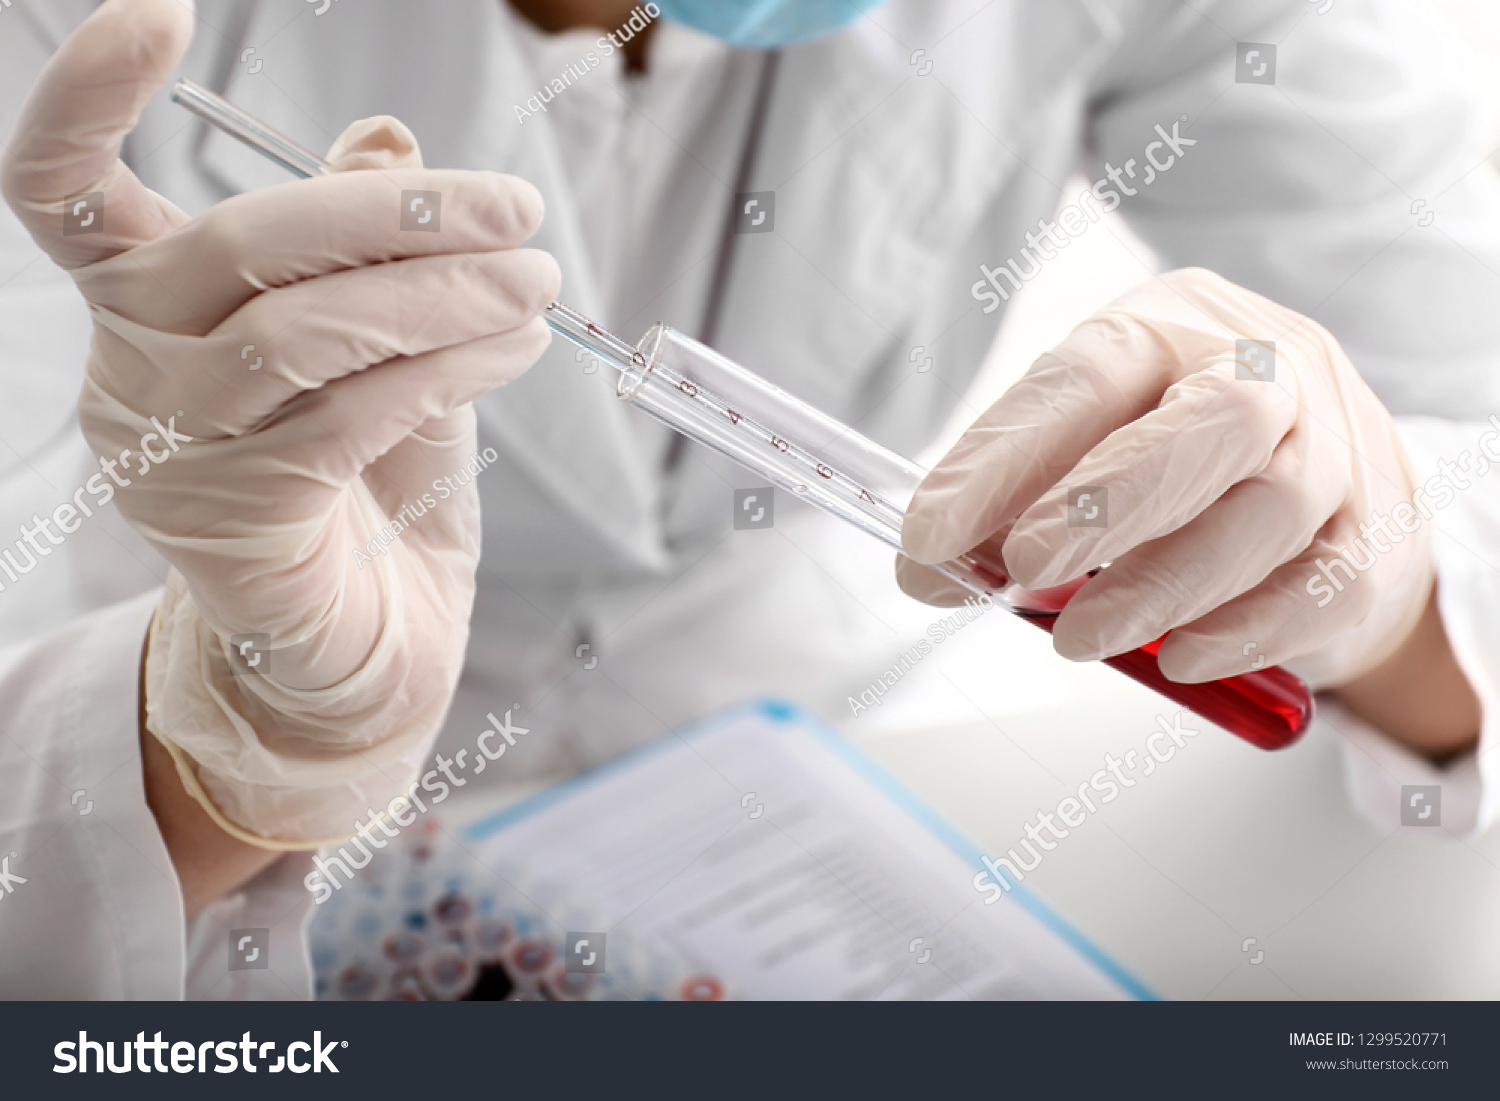 Woman working with blood sample in laboratory, closeup #1299520771